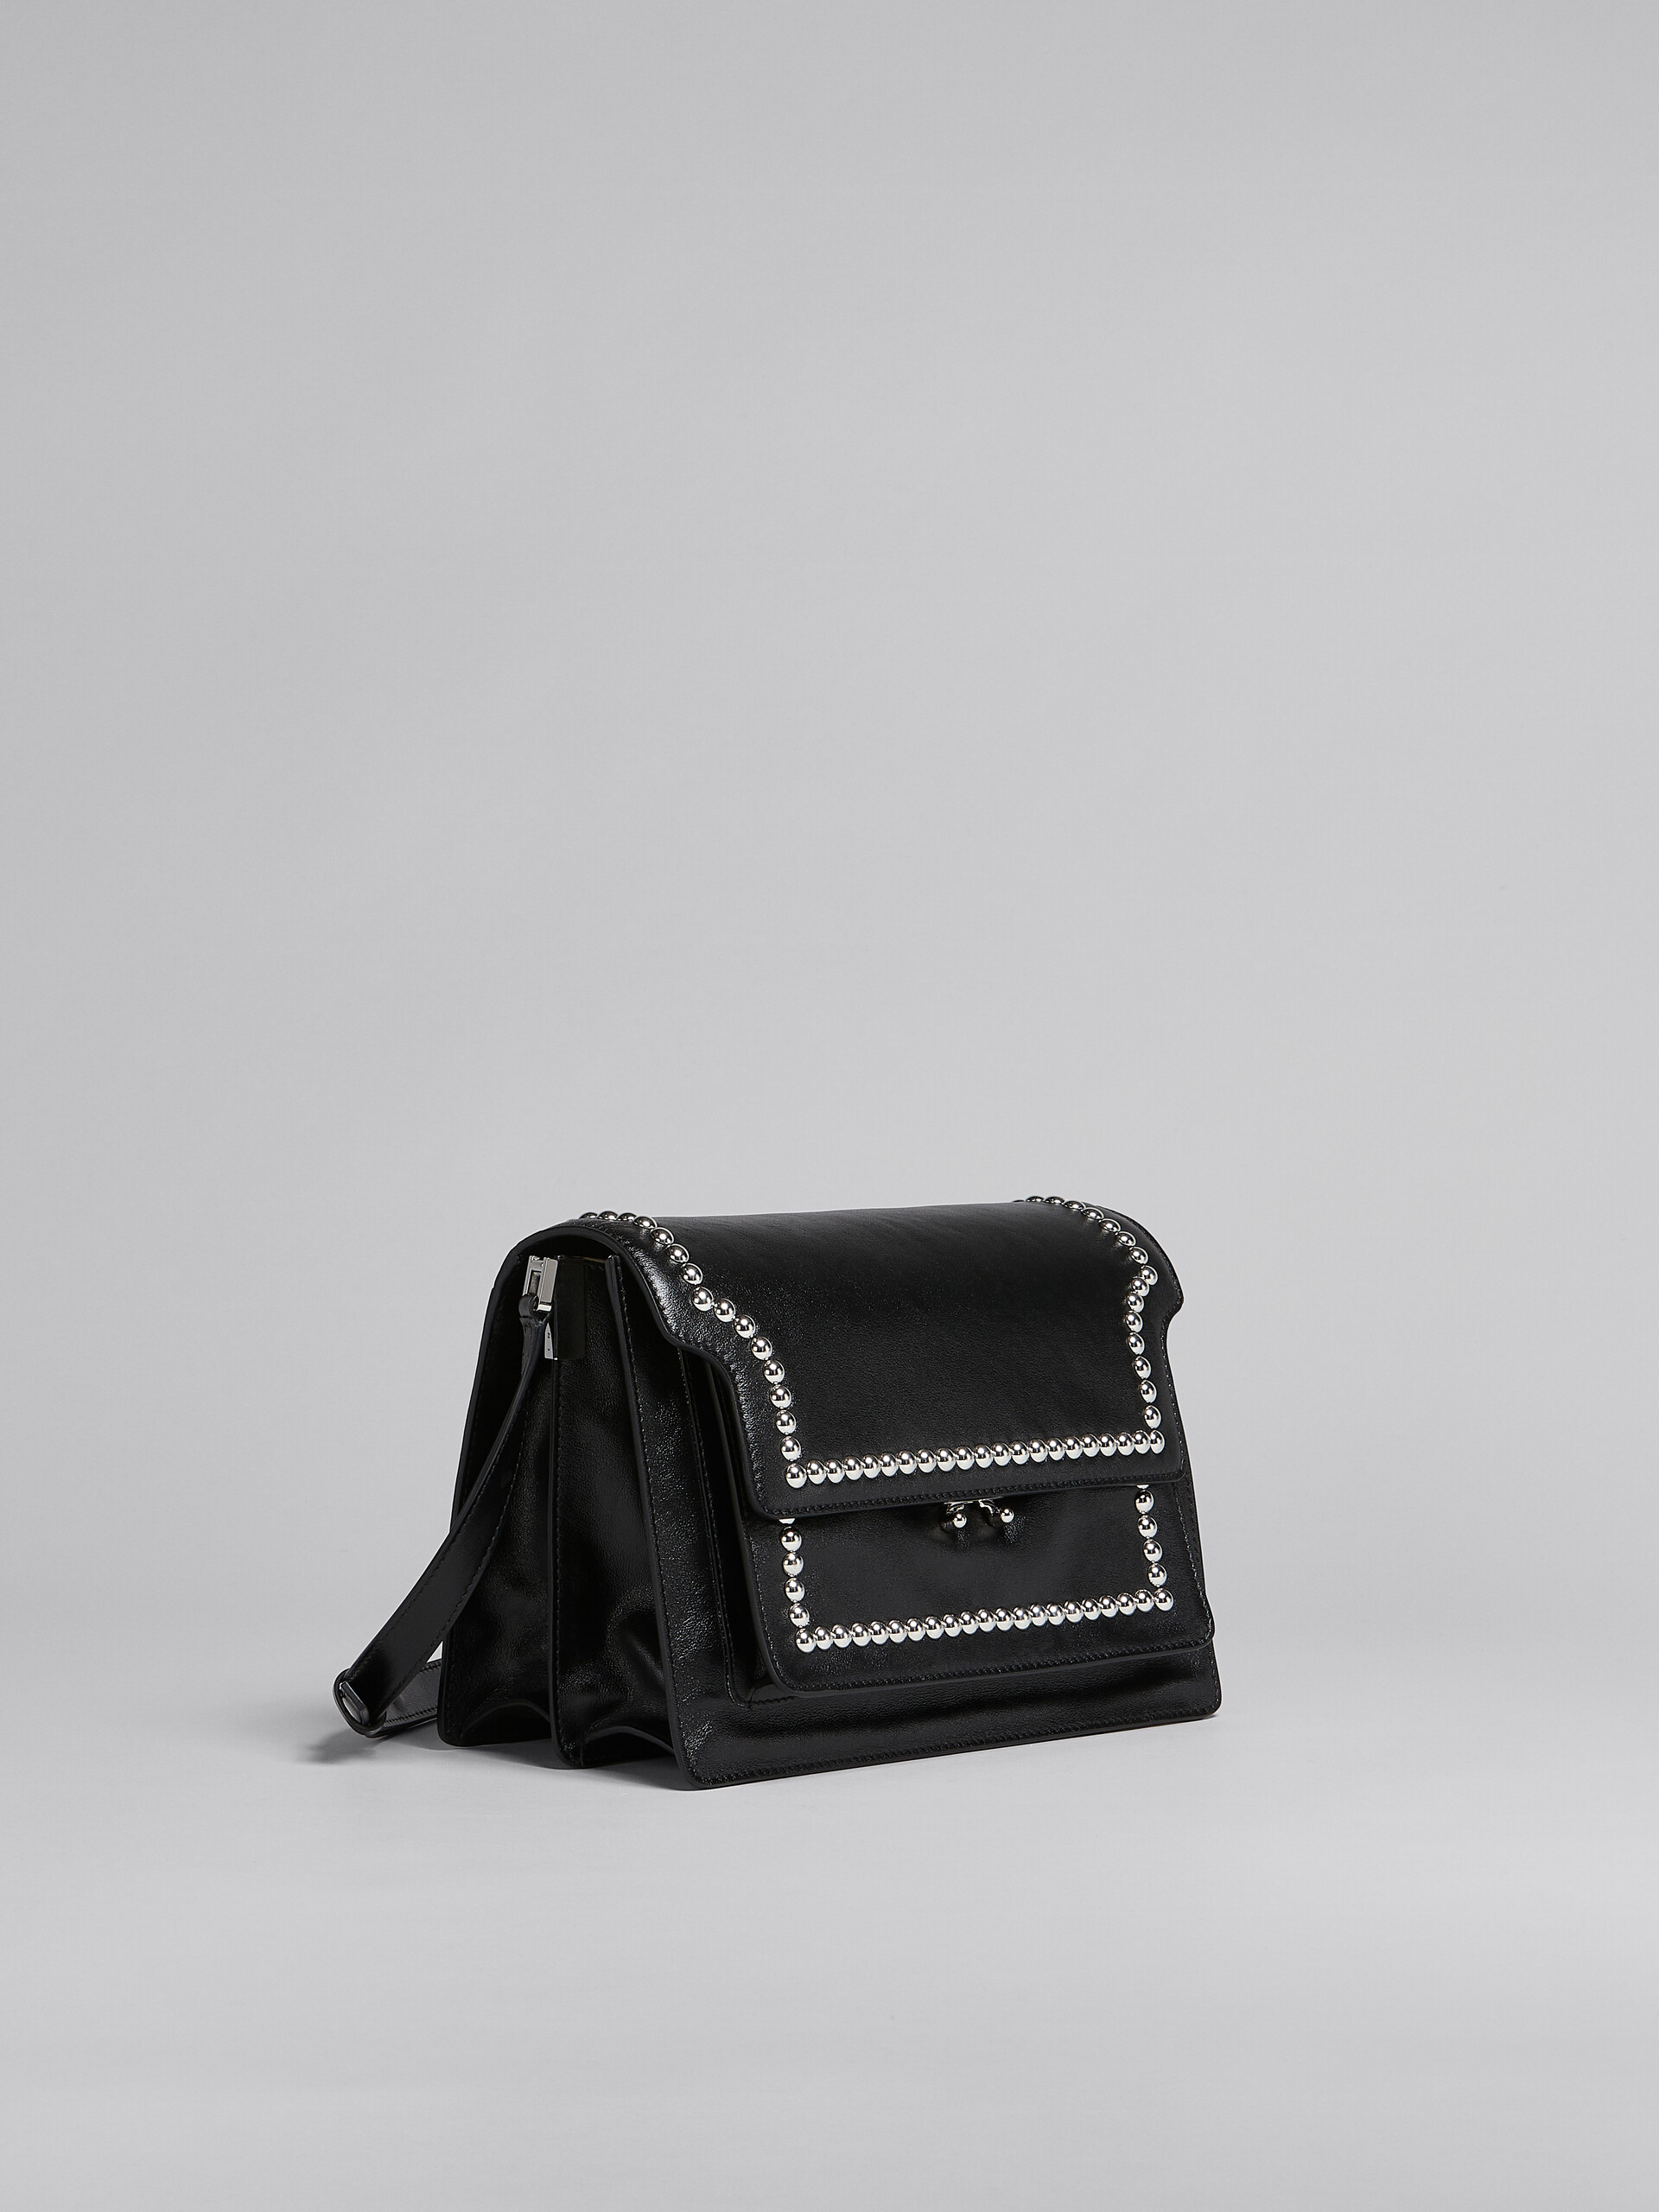 Trunk Soft Large Bag in black leather with studs - Shoulder Bags - Image 6